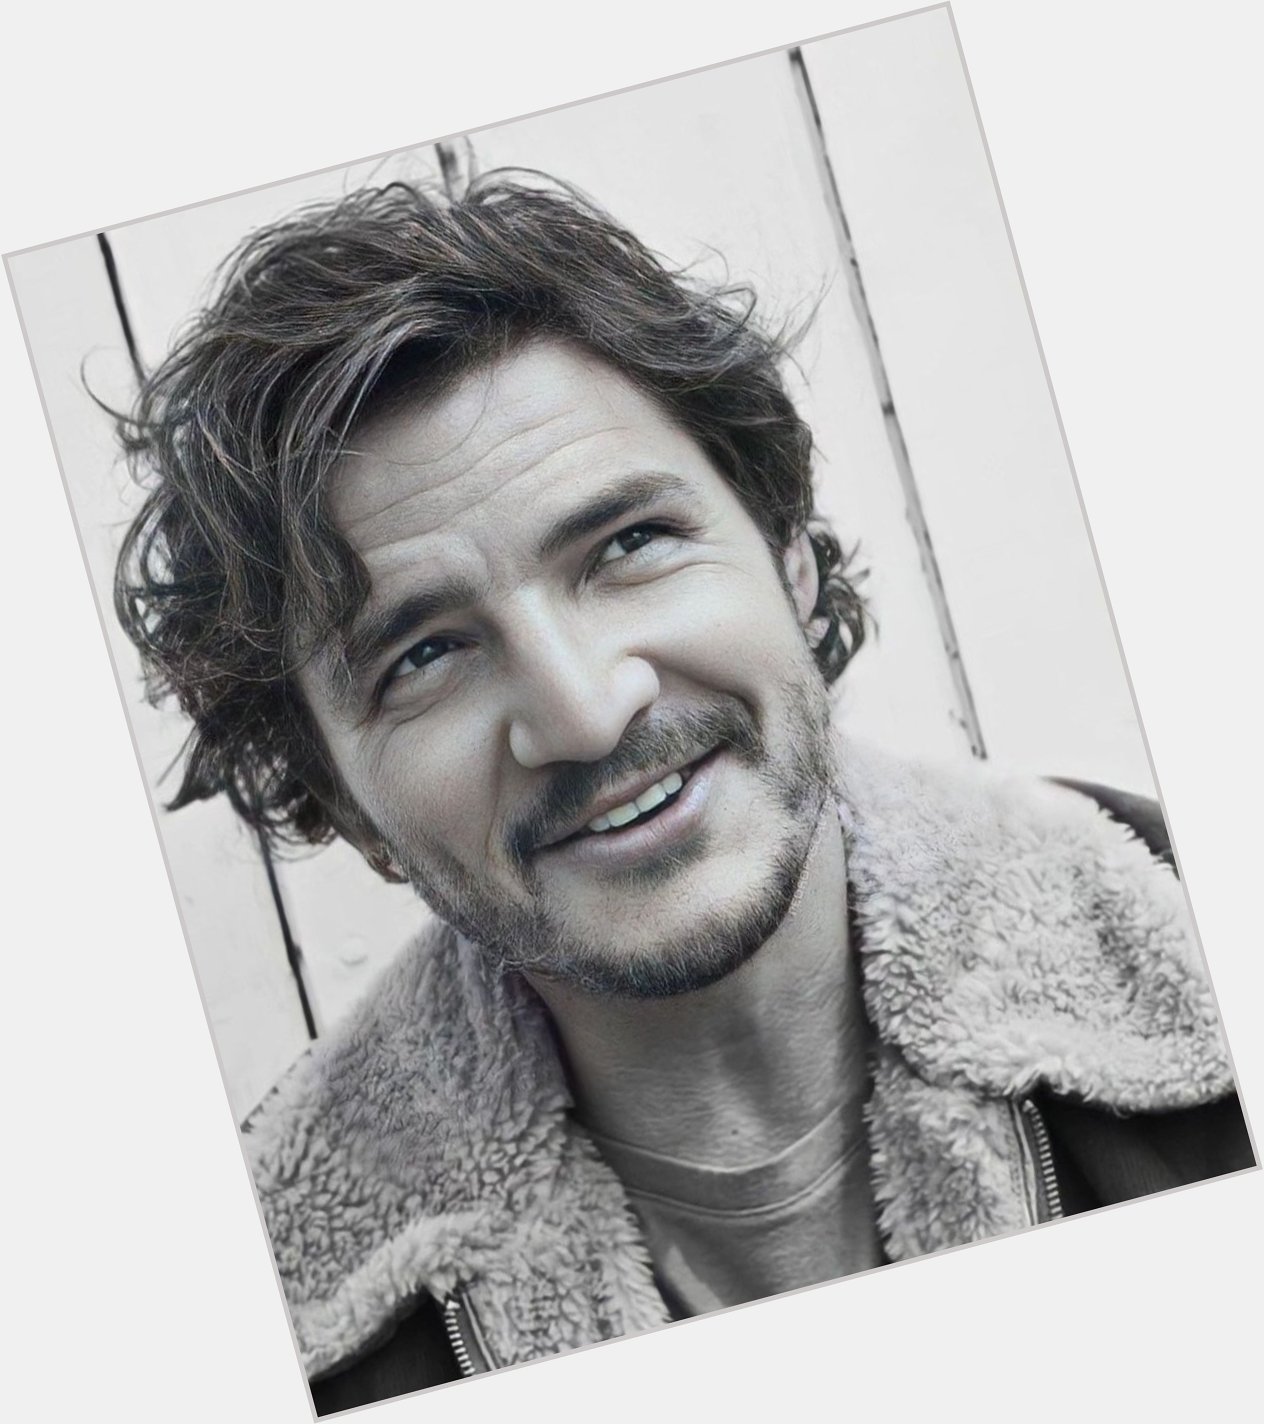 I\m back on message and I want to wish the wonderful Pedro Pascal a very happy birthday! 